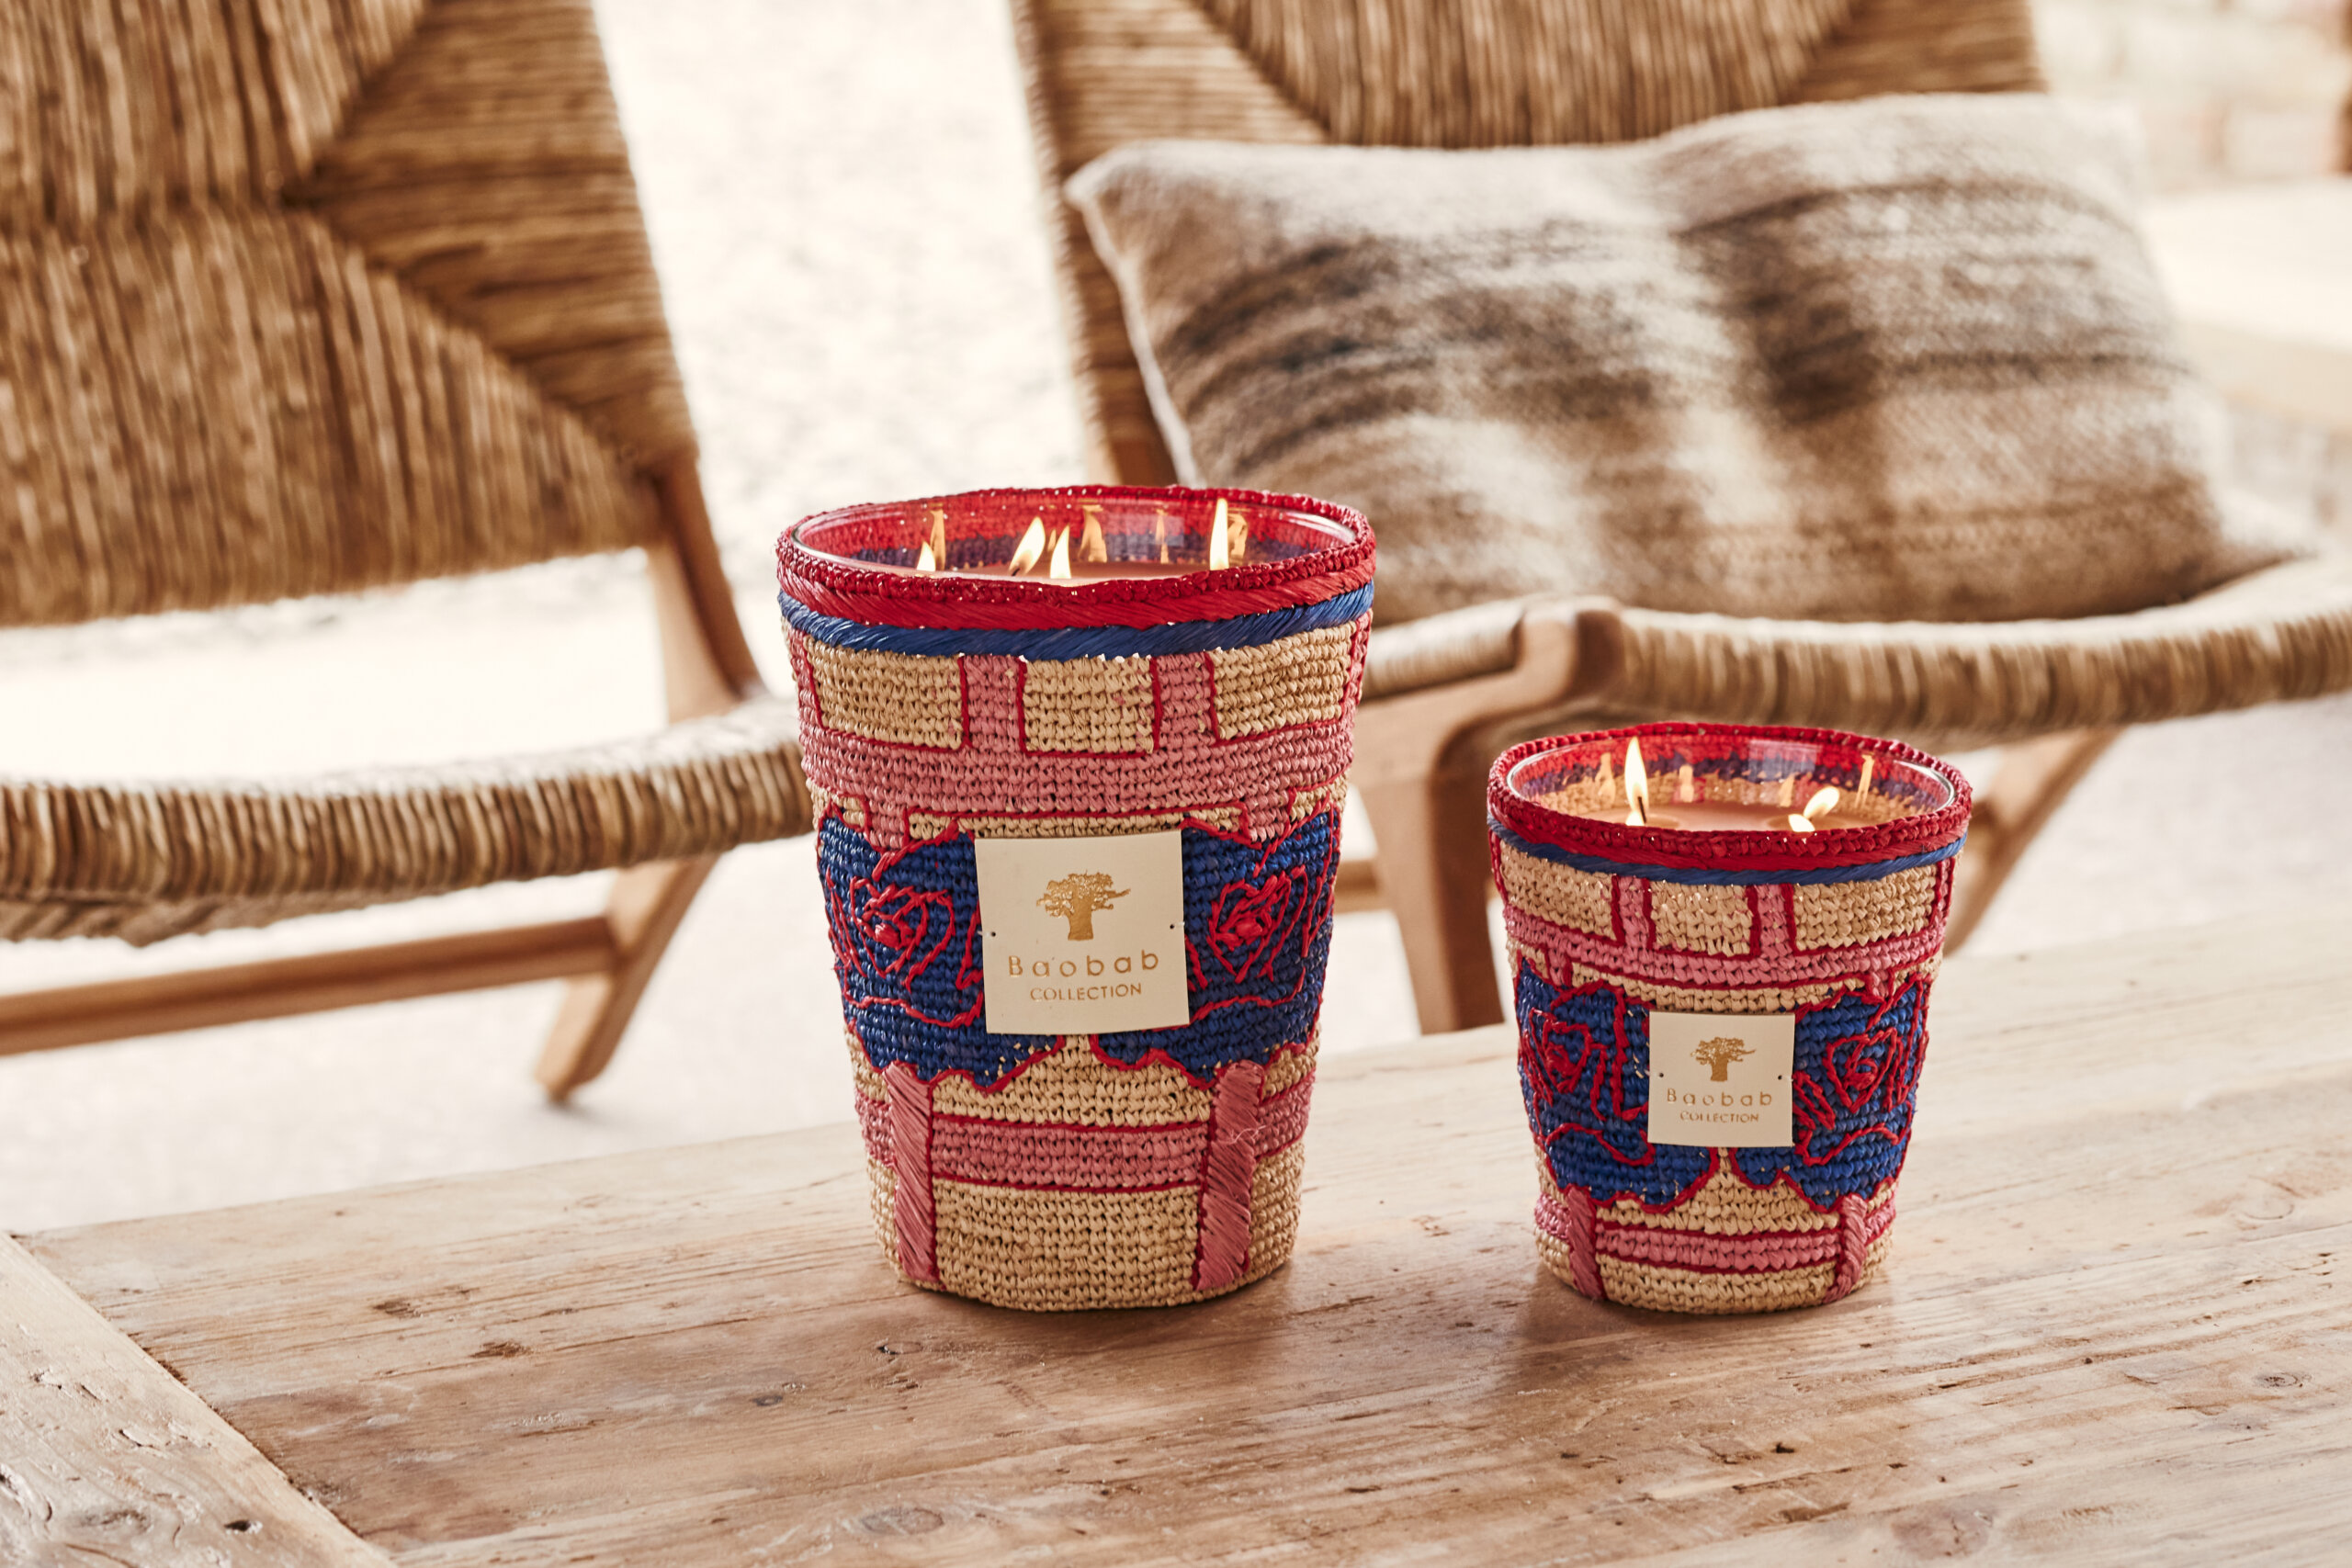 Baobab Collection's Candle Frida Draozy